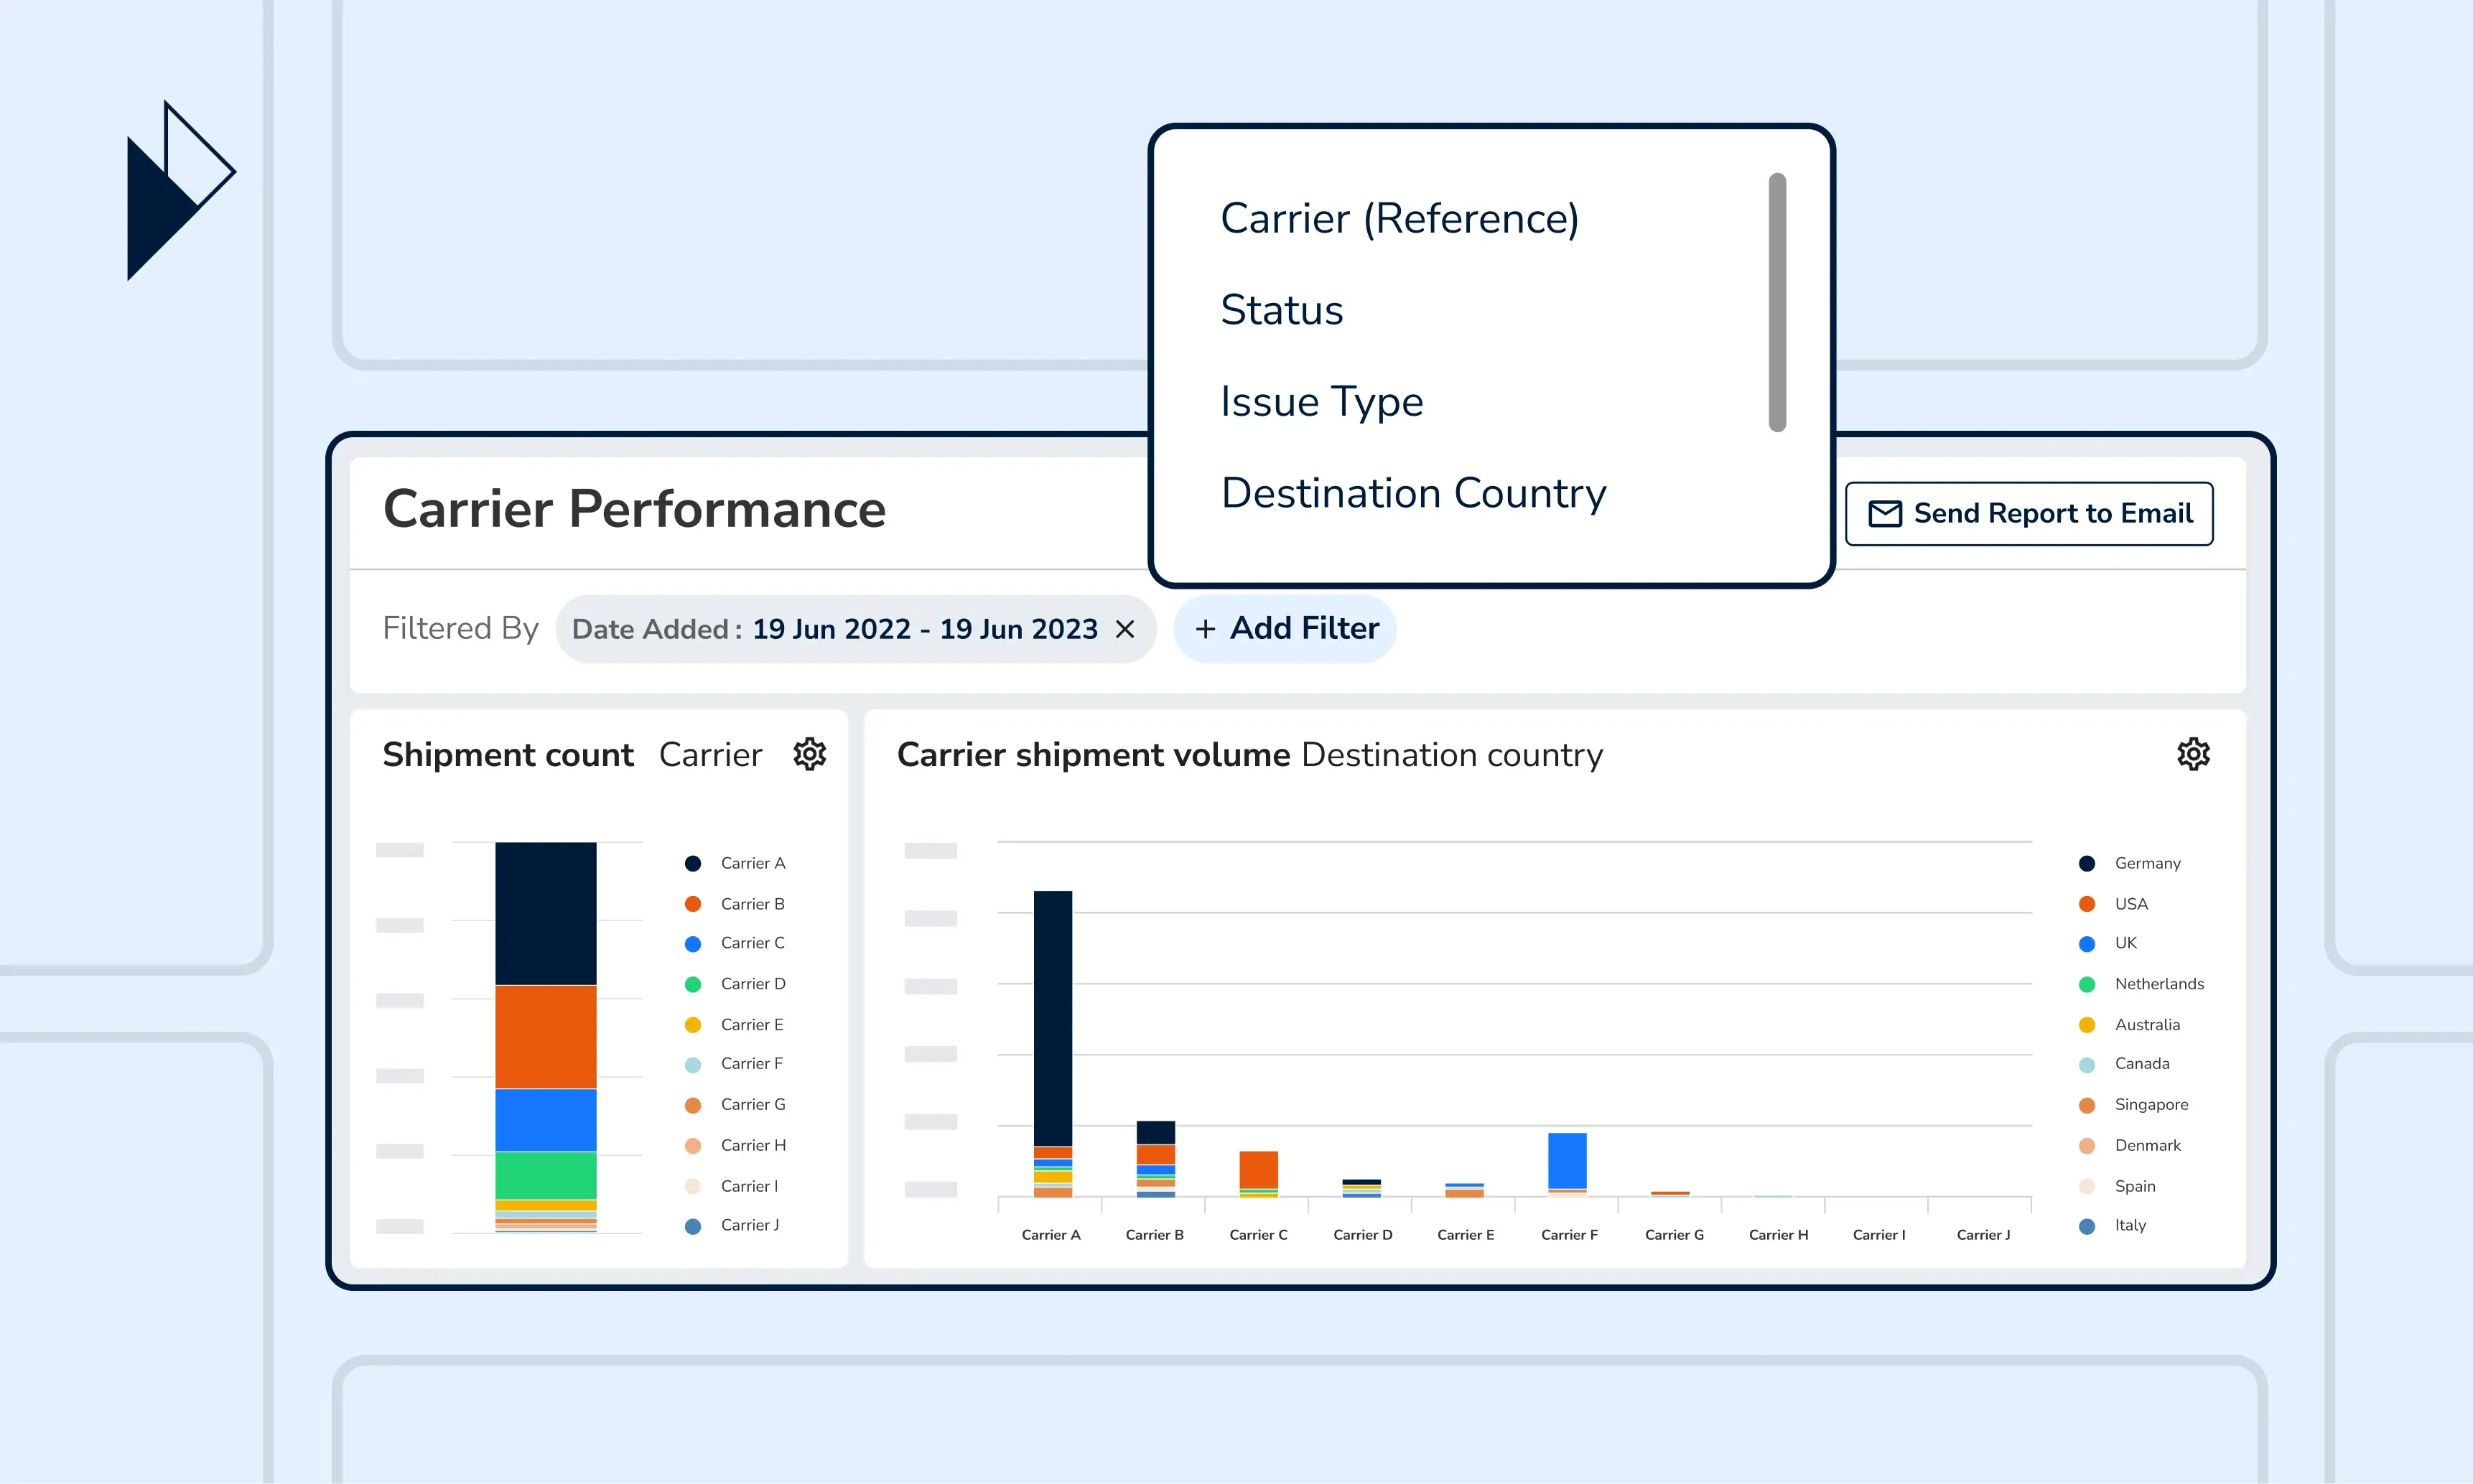 Parcel Perform ANALYZE Report on Carrier Performance with various charts that help compare and assess carriers' delivery KPIs